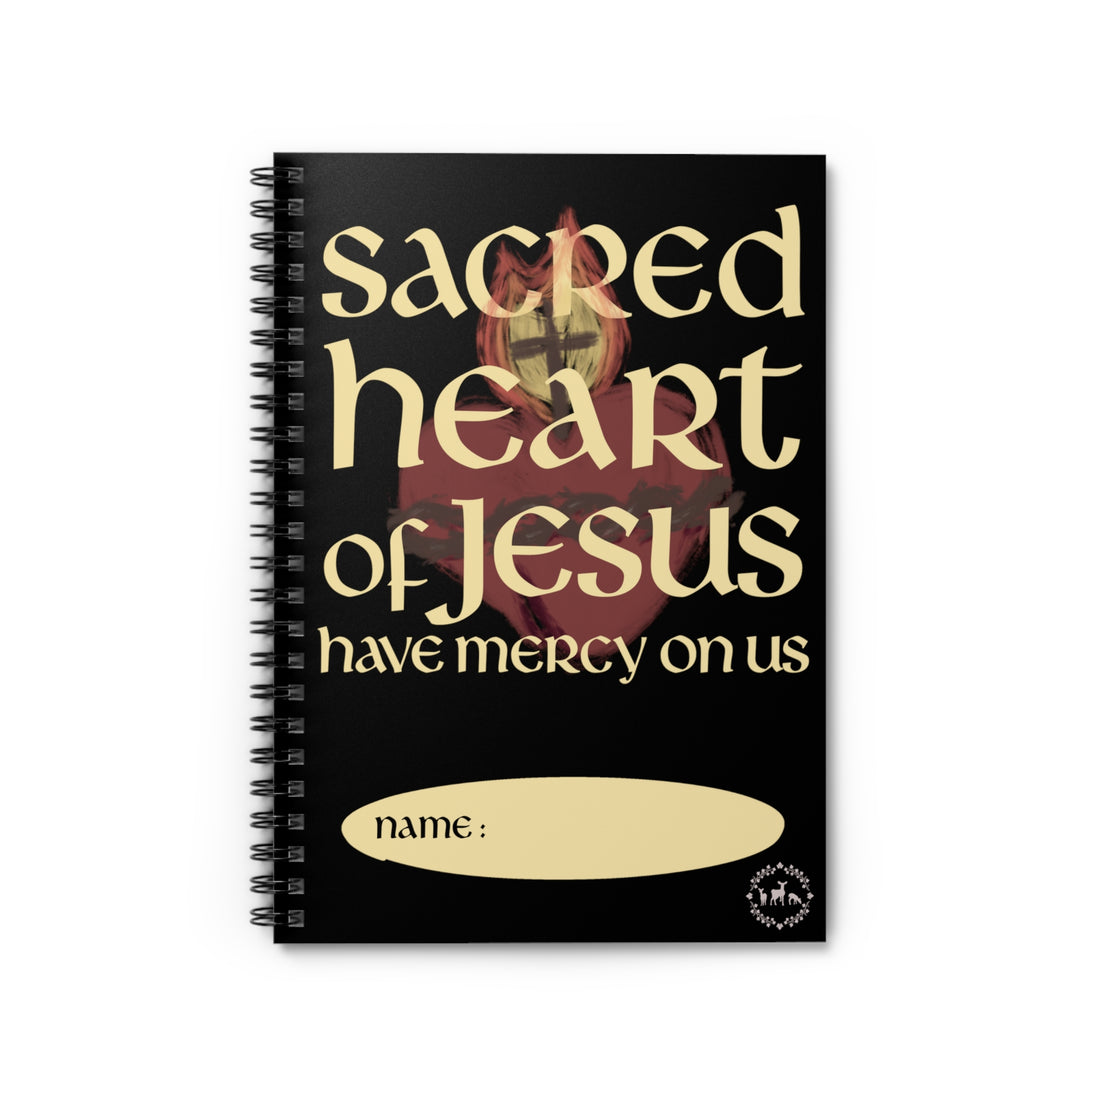 Sacred Heart of Jesus Journal - Ruled Lined